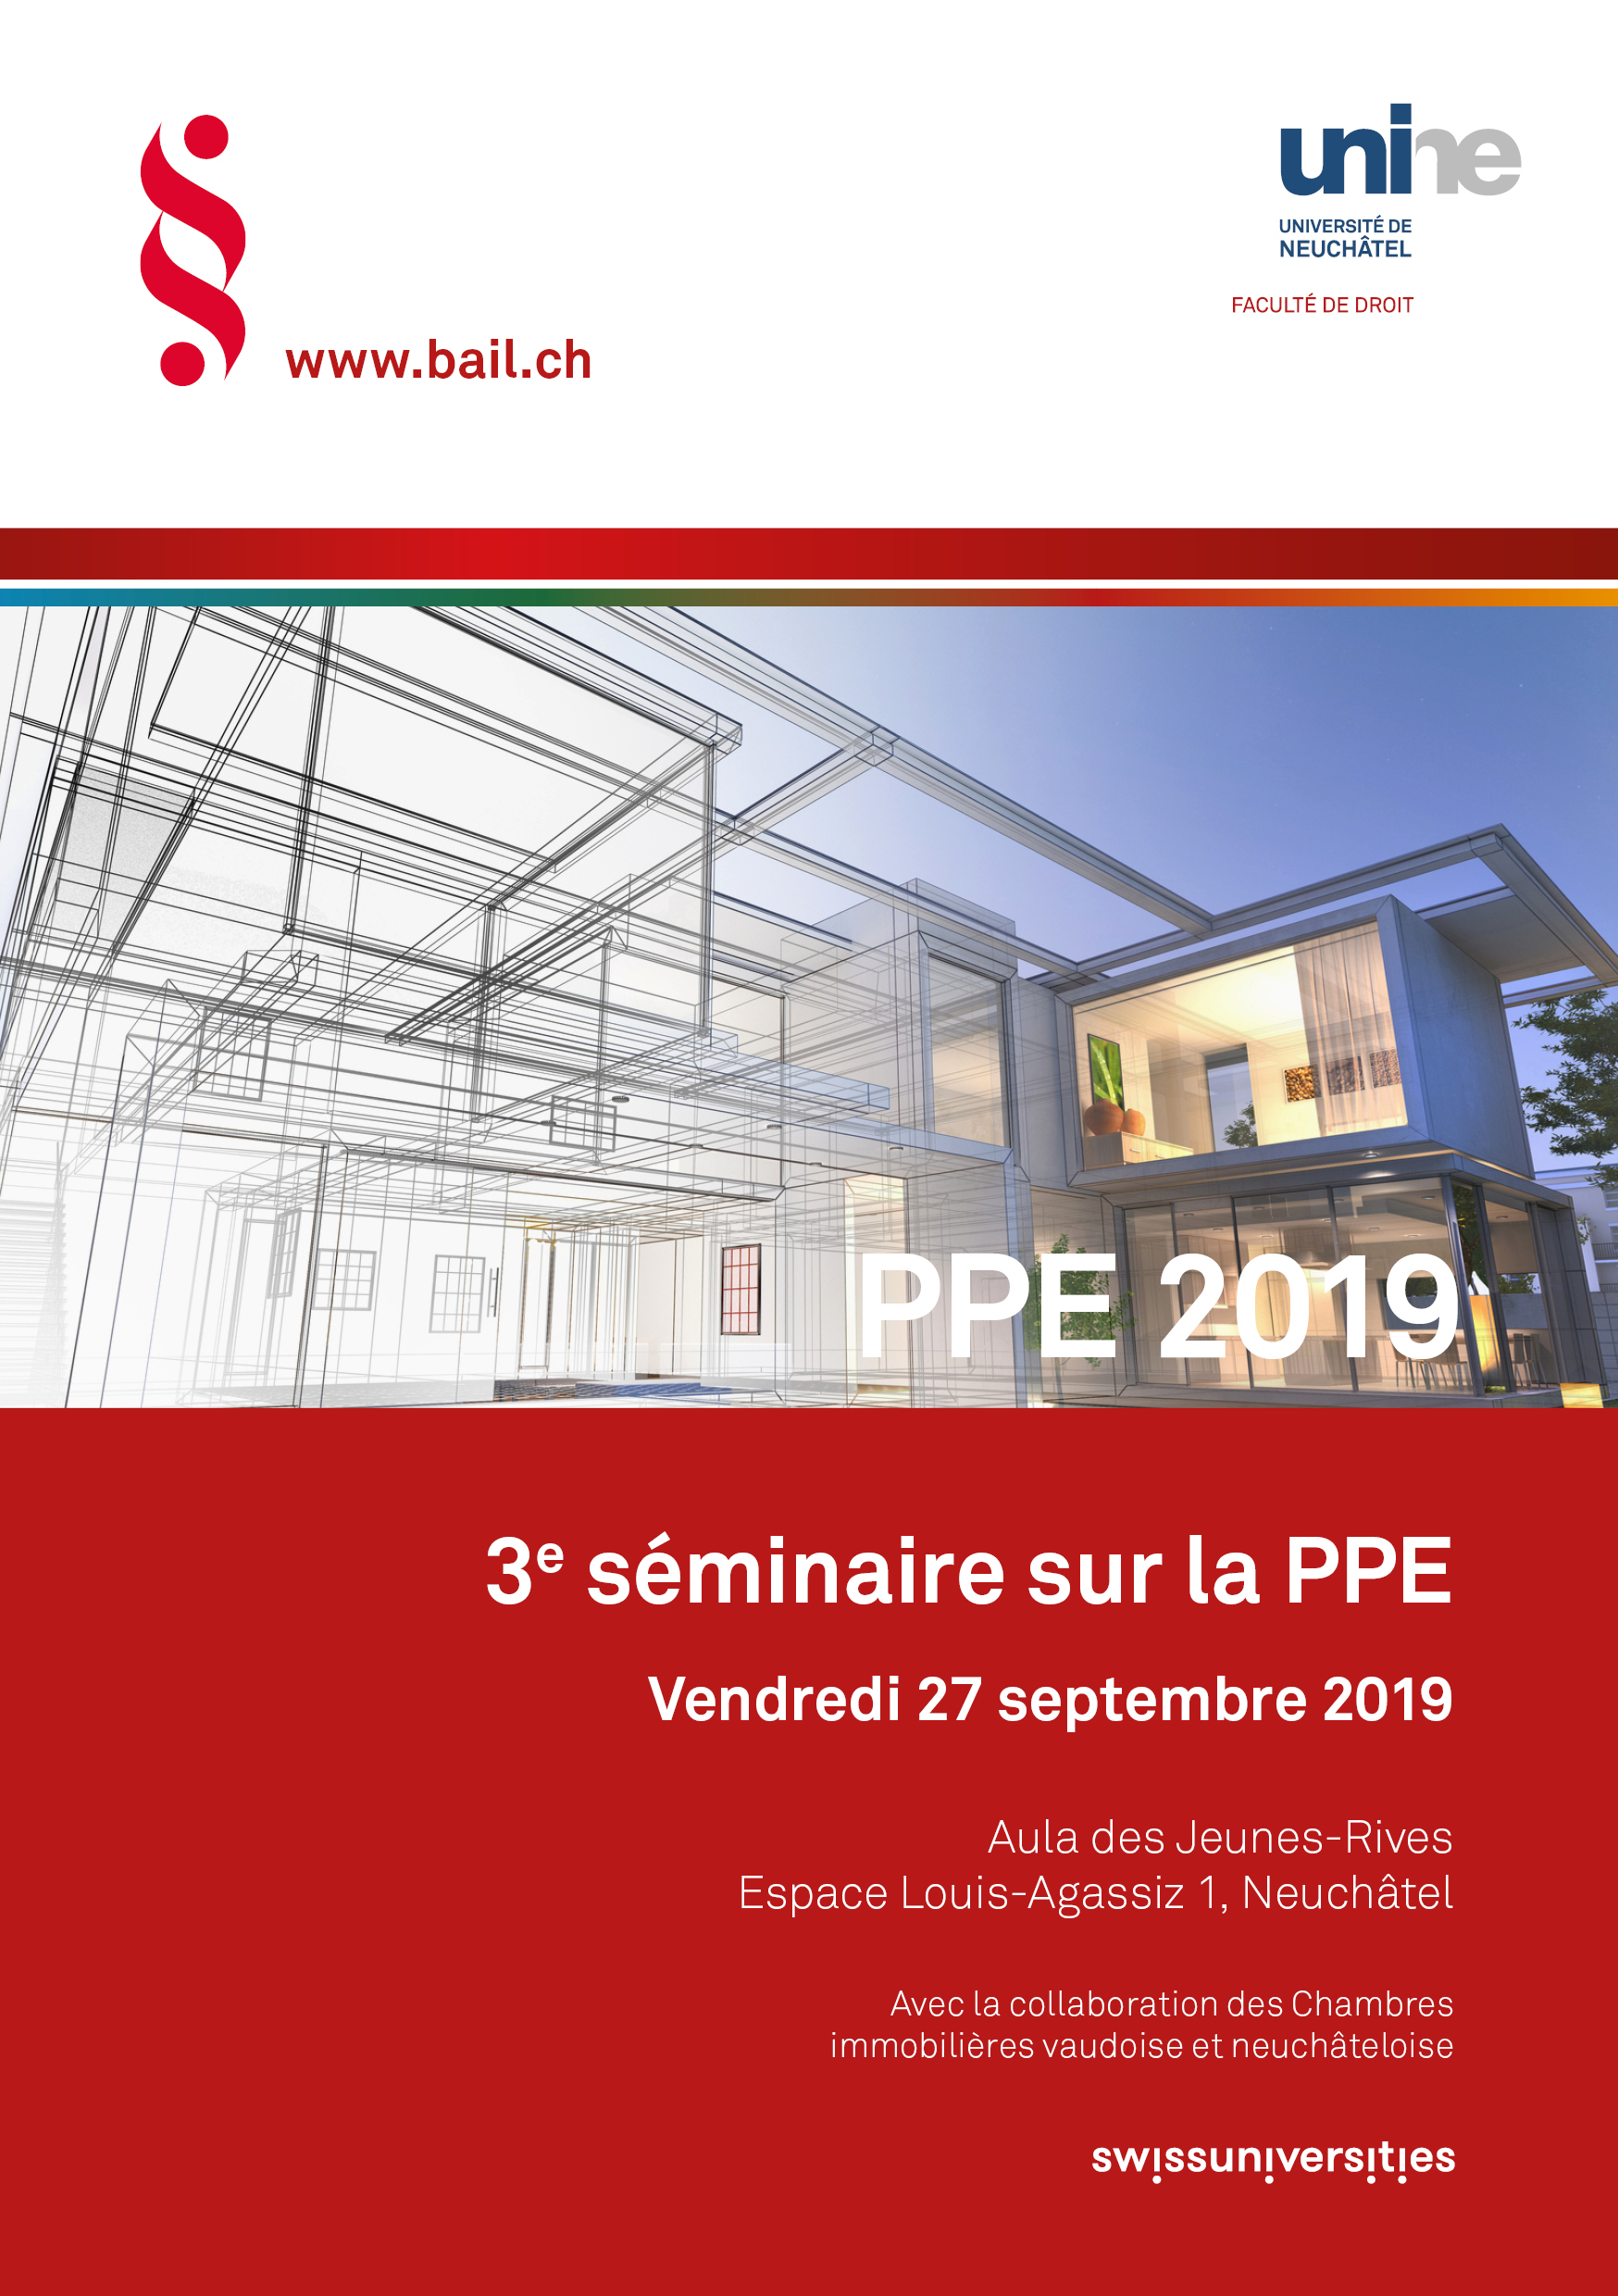 PPE 2019